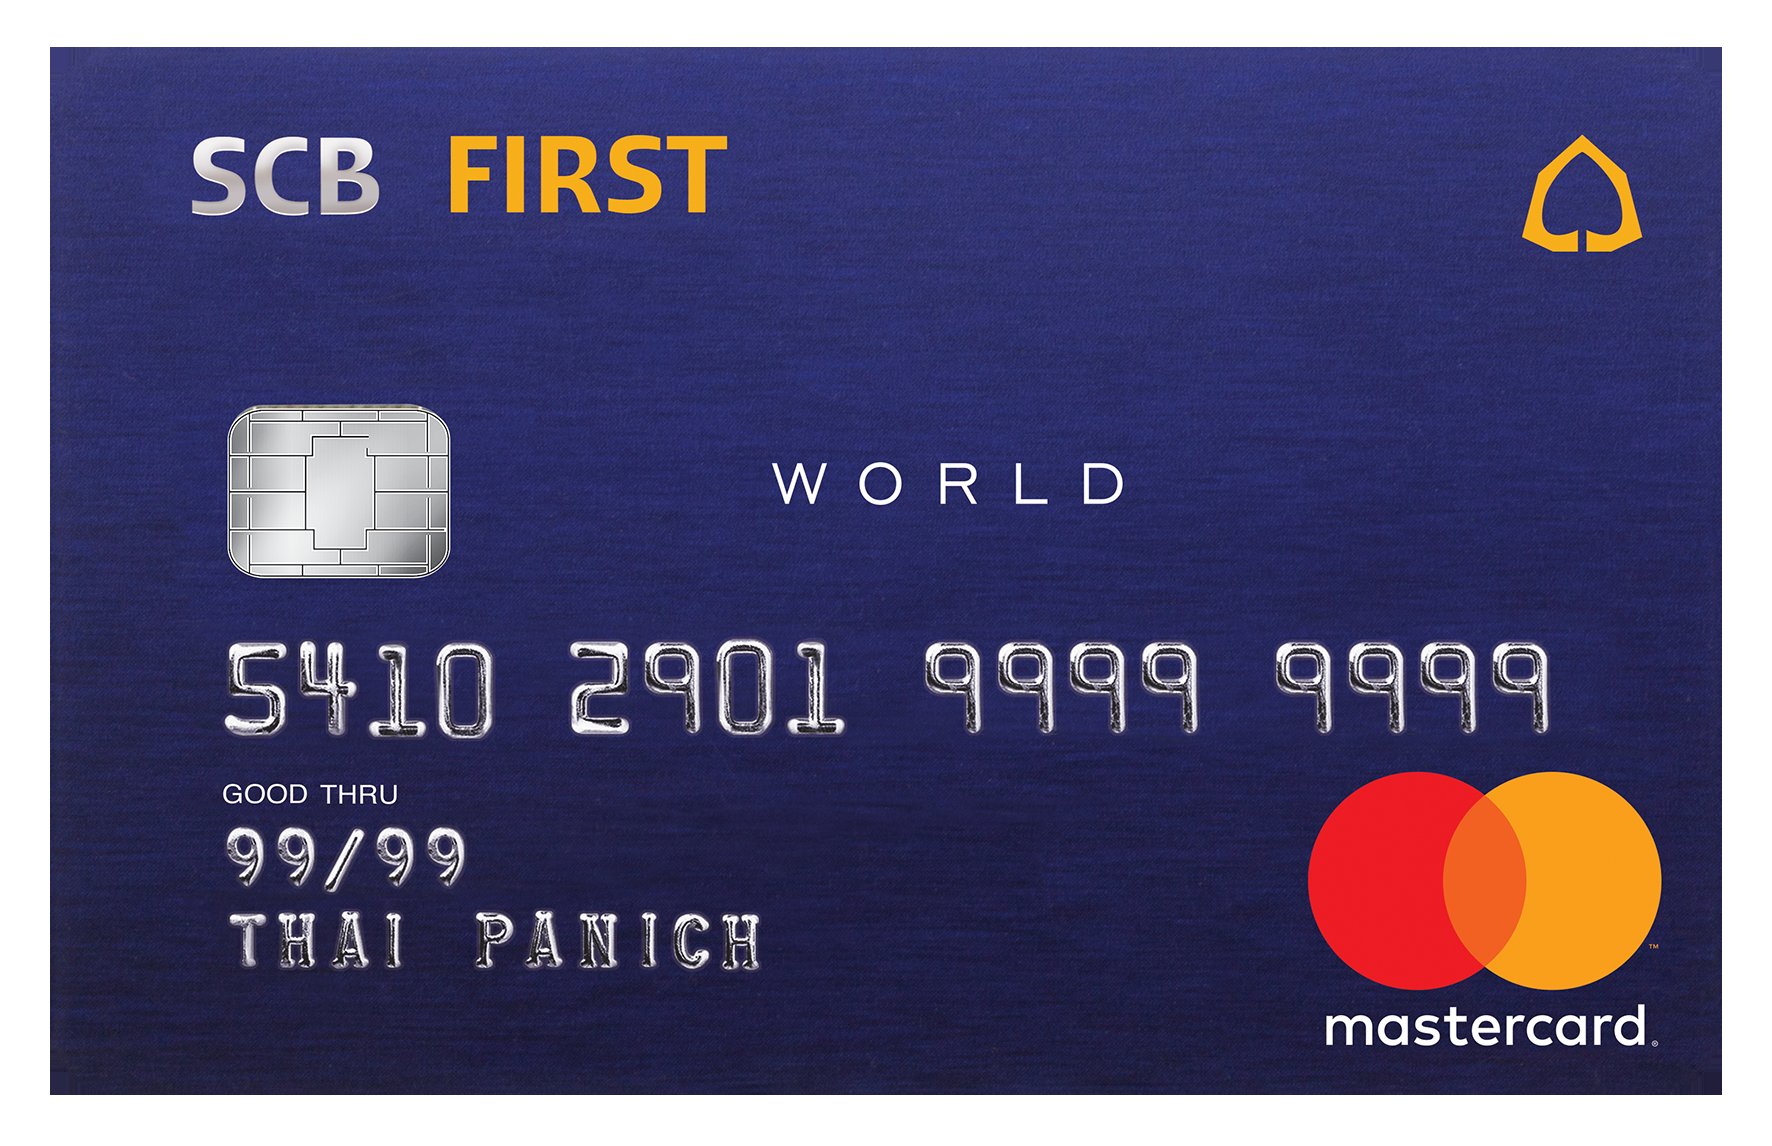 scb-first-card-image-2019-png